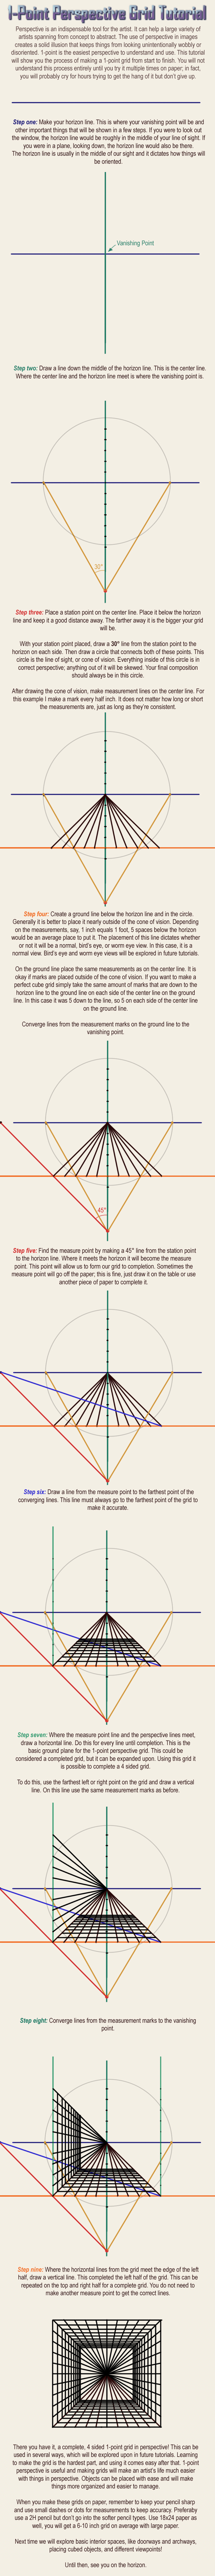 1-Point Perspective Tutorial